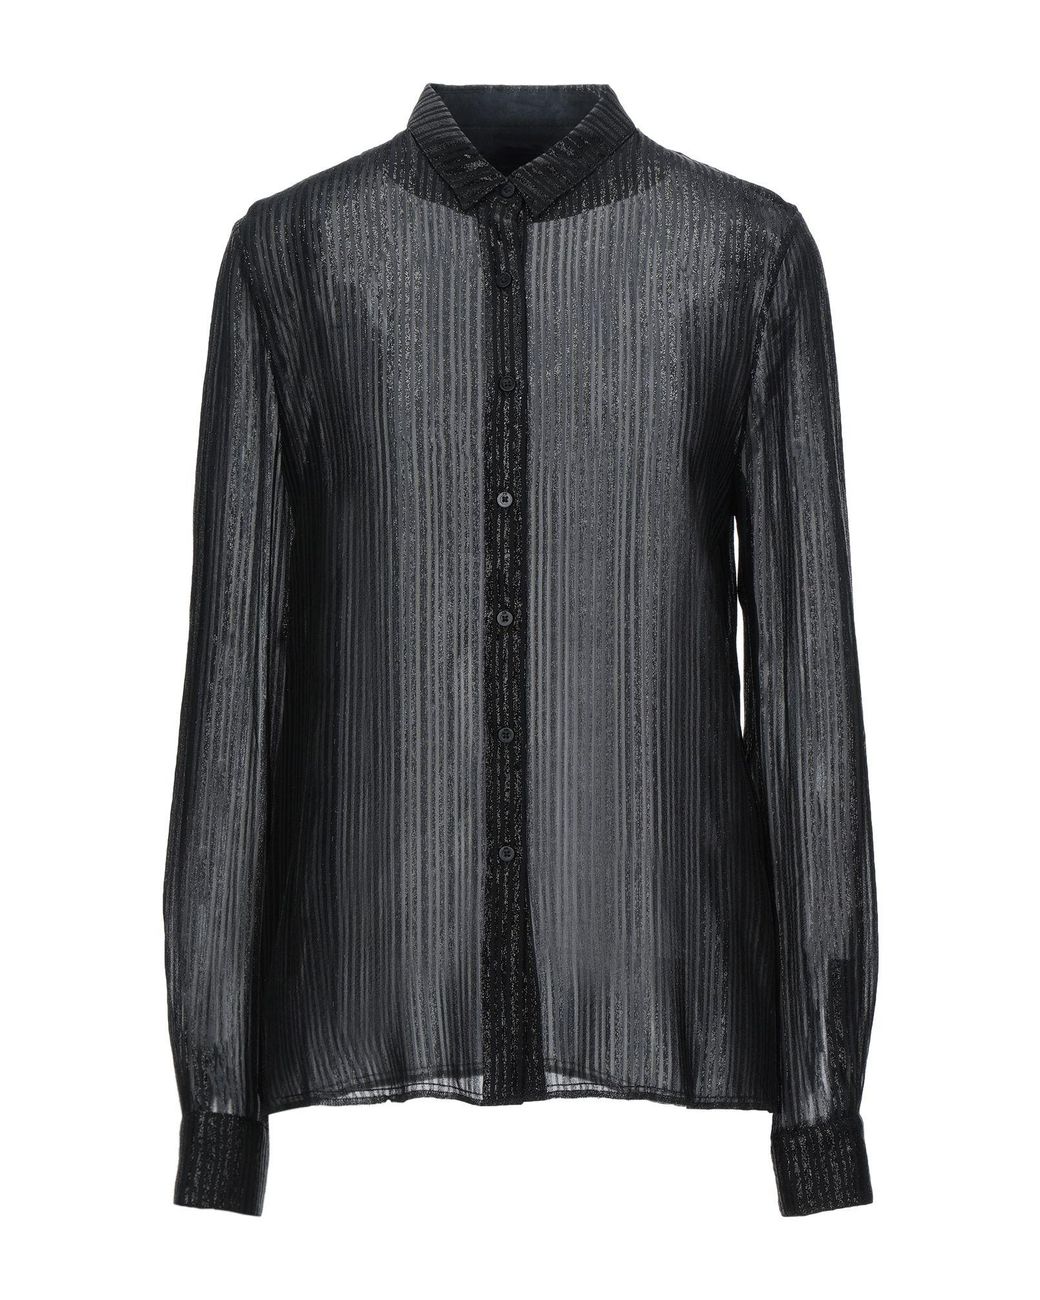 RTA Synthetic Shirt in Black - Lyst